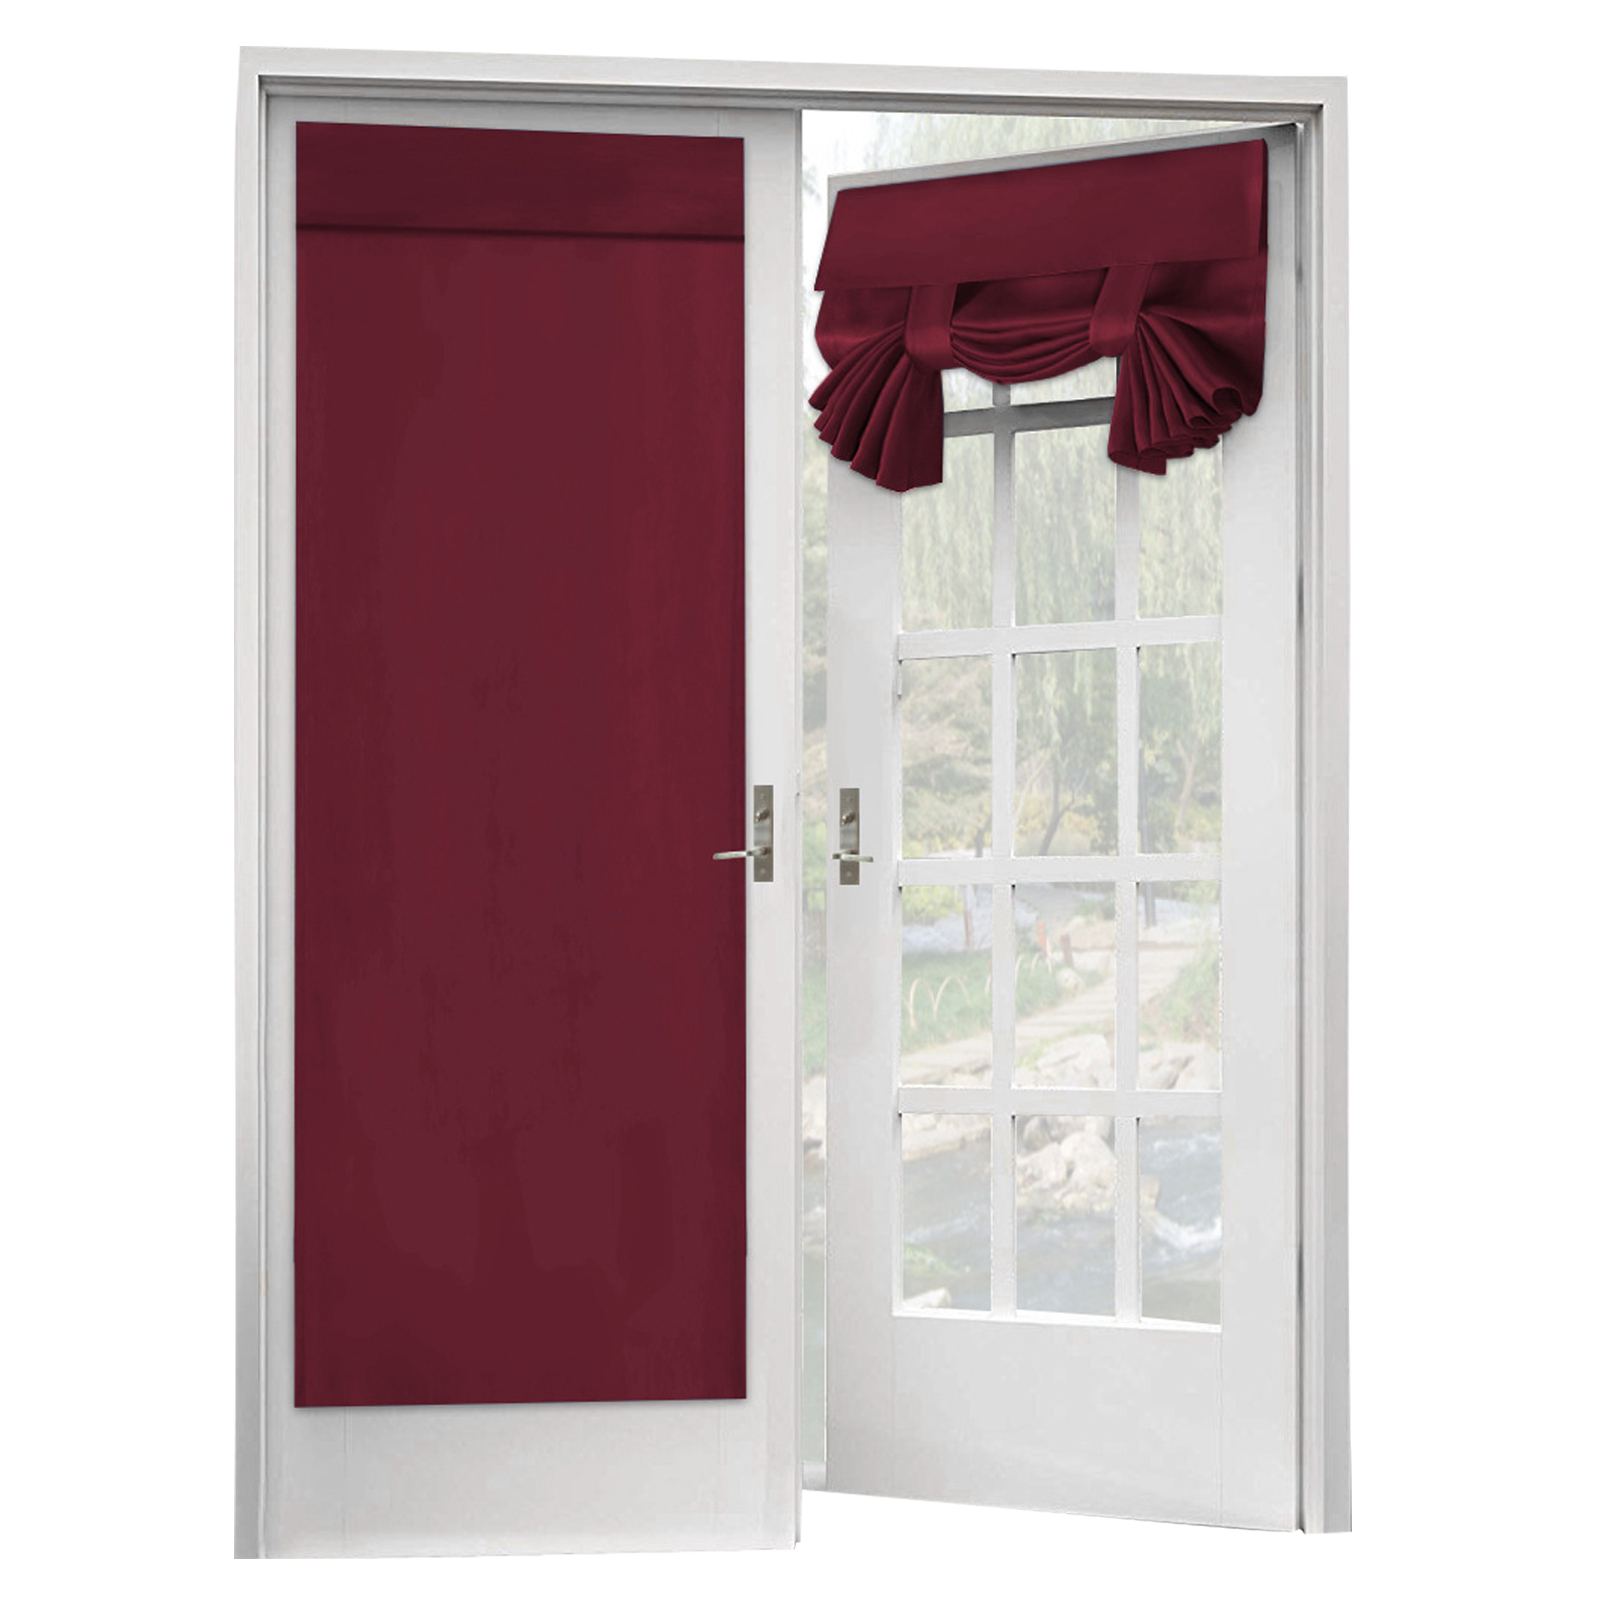 Punch Free French Door Curtain Thermal Insulated Blackout Curtains Patio Ds